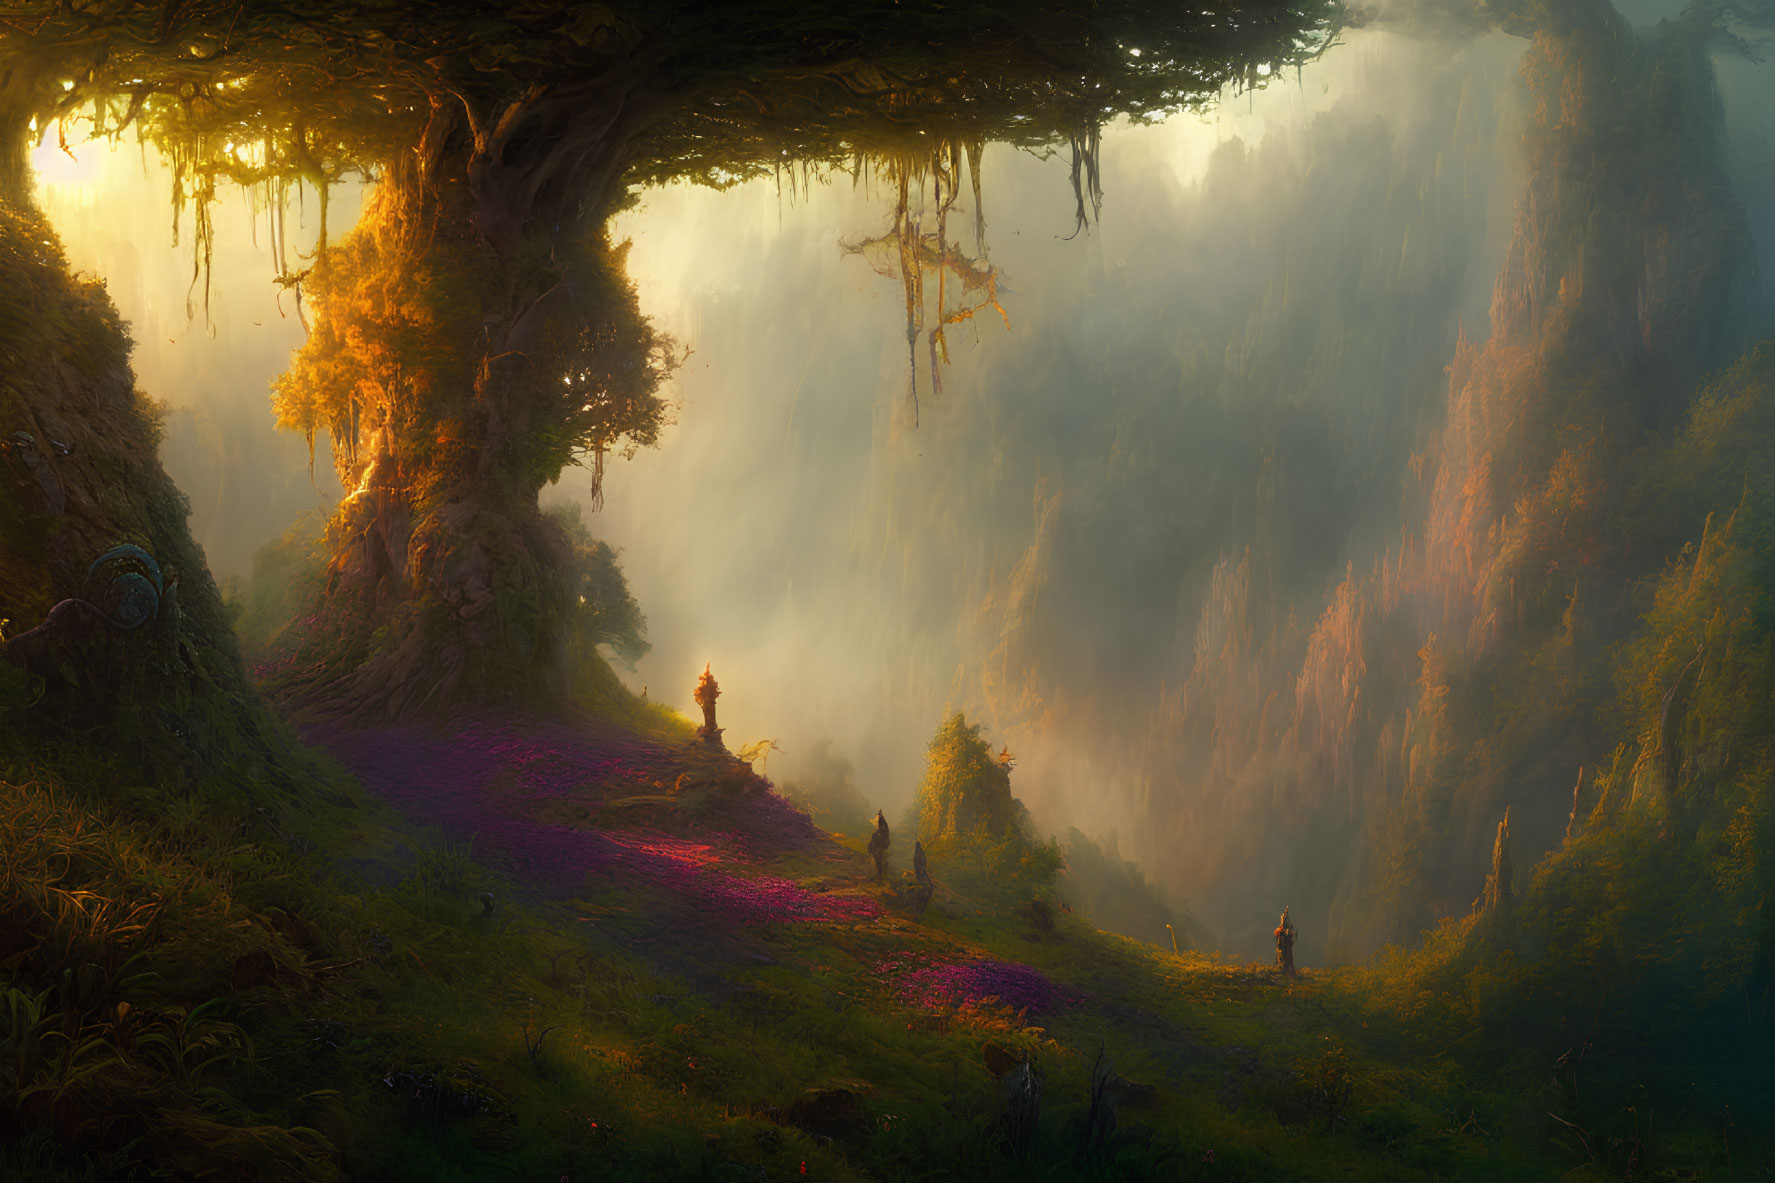 Sunlit Path Through Mystical Forest with Travelers, Towering Trees, and Purple Flowers